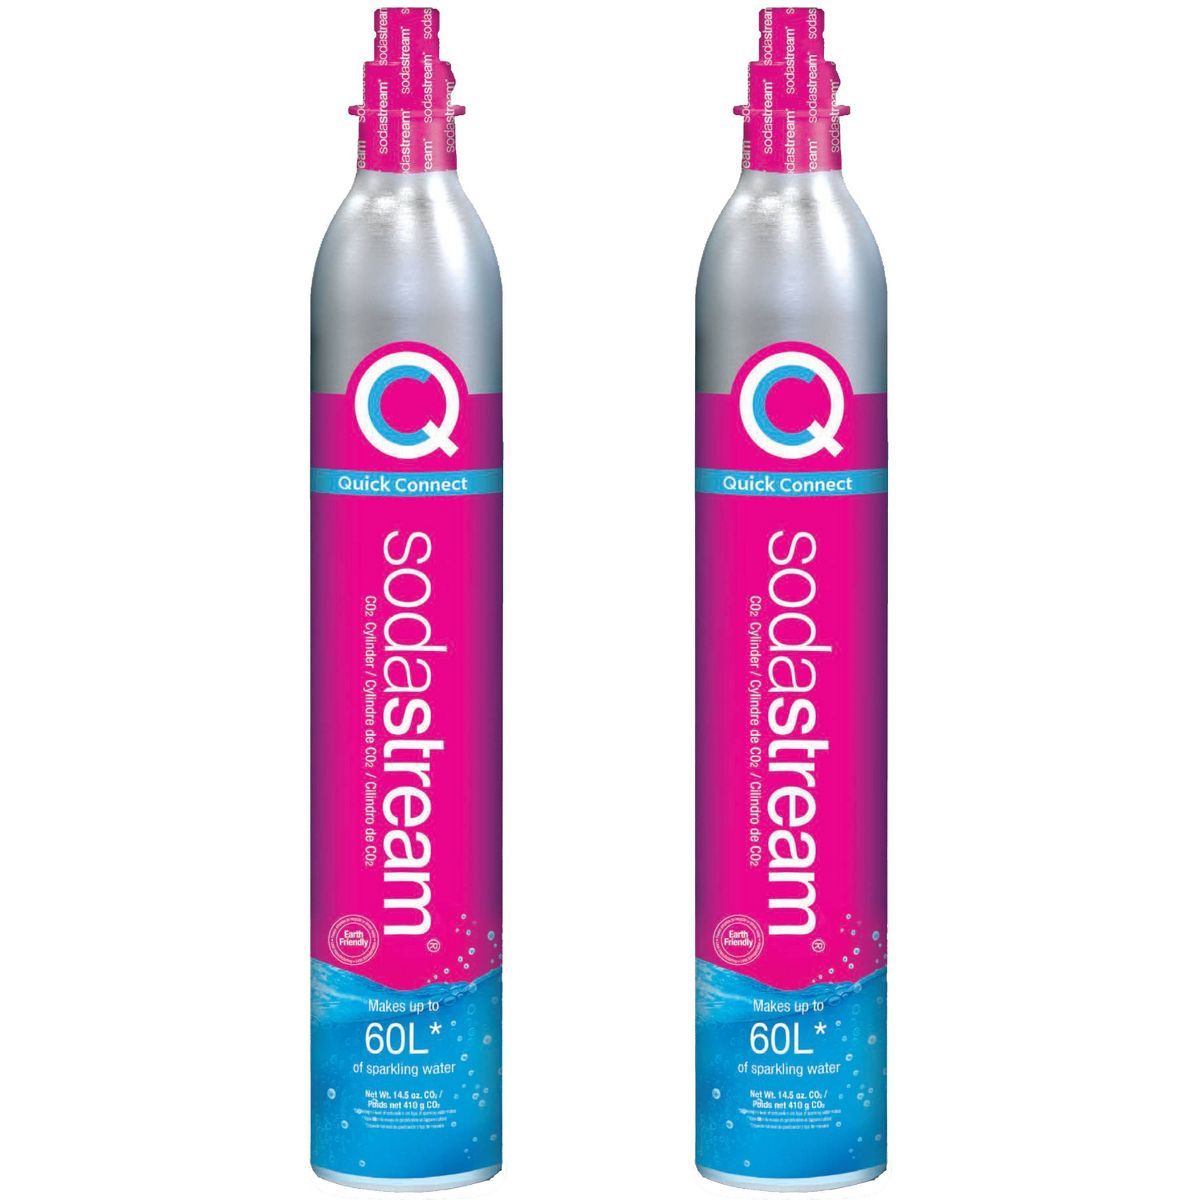 Sodastream Quick Connect Co2 Exchange Carbonator Set of 2 Plus Target Gift Card with Exchange | Target